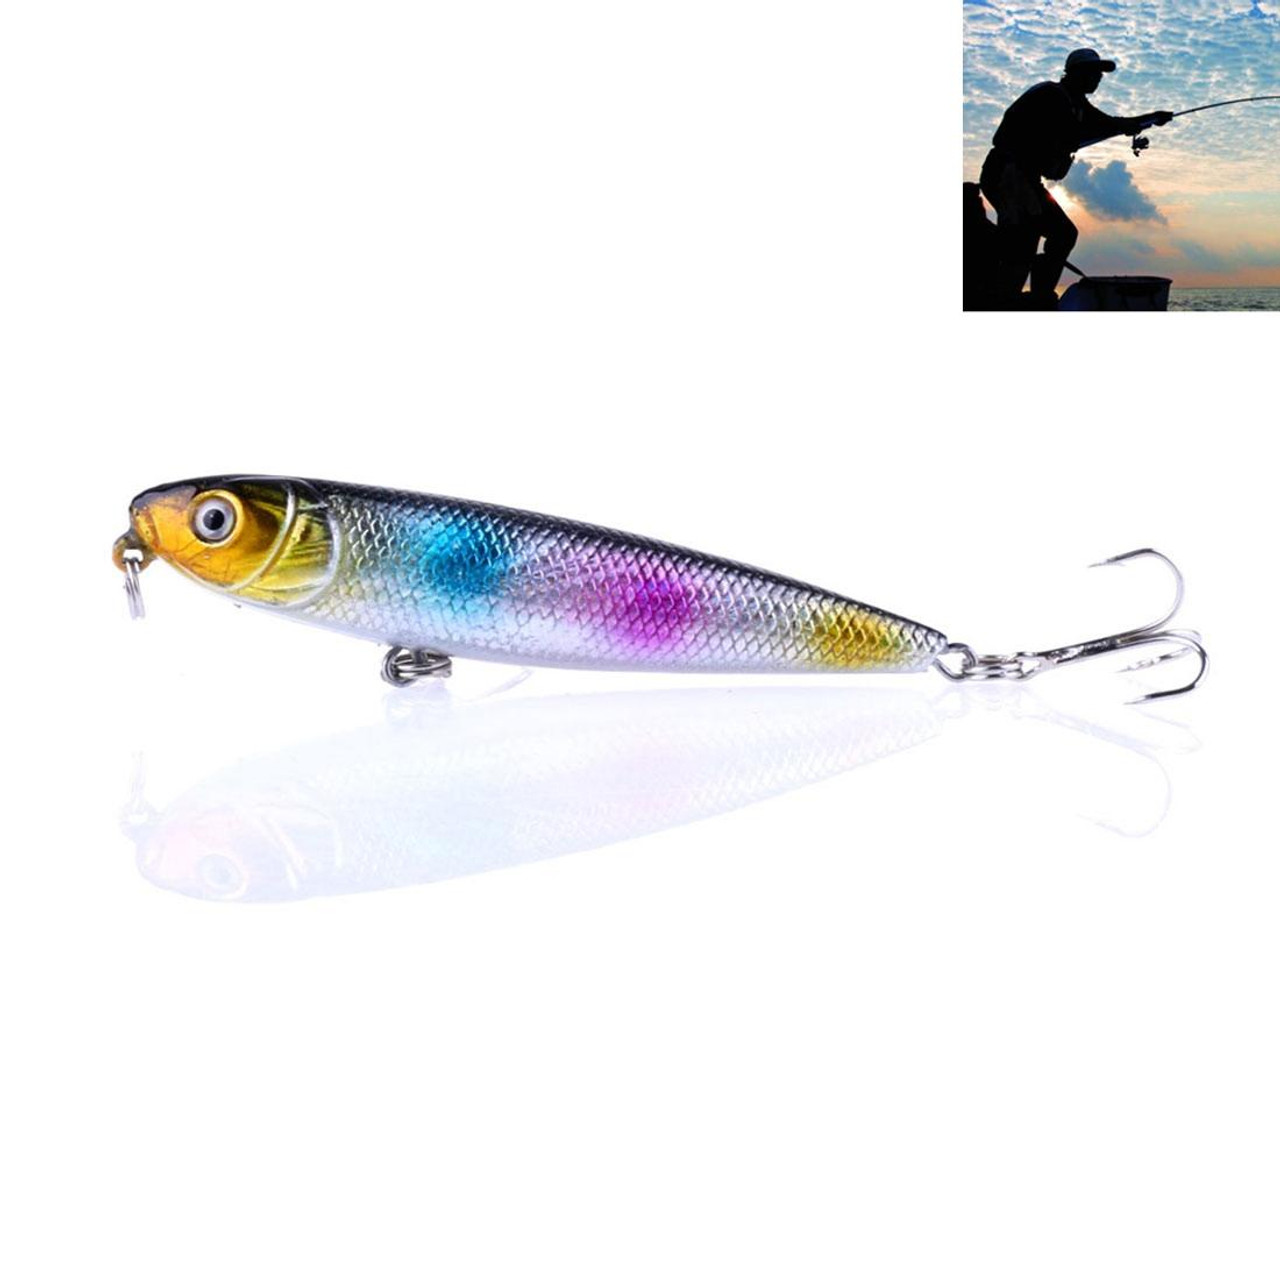 HENGJIA PE006 8cm/8.5g Hard Baits Fishing Lures Tackle Baits Fit Saltwater  and Freshwater (6#), snatcher